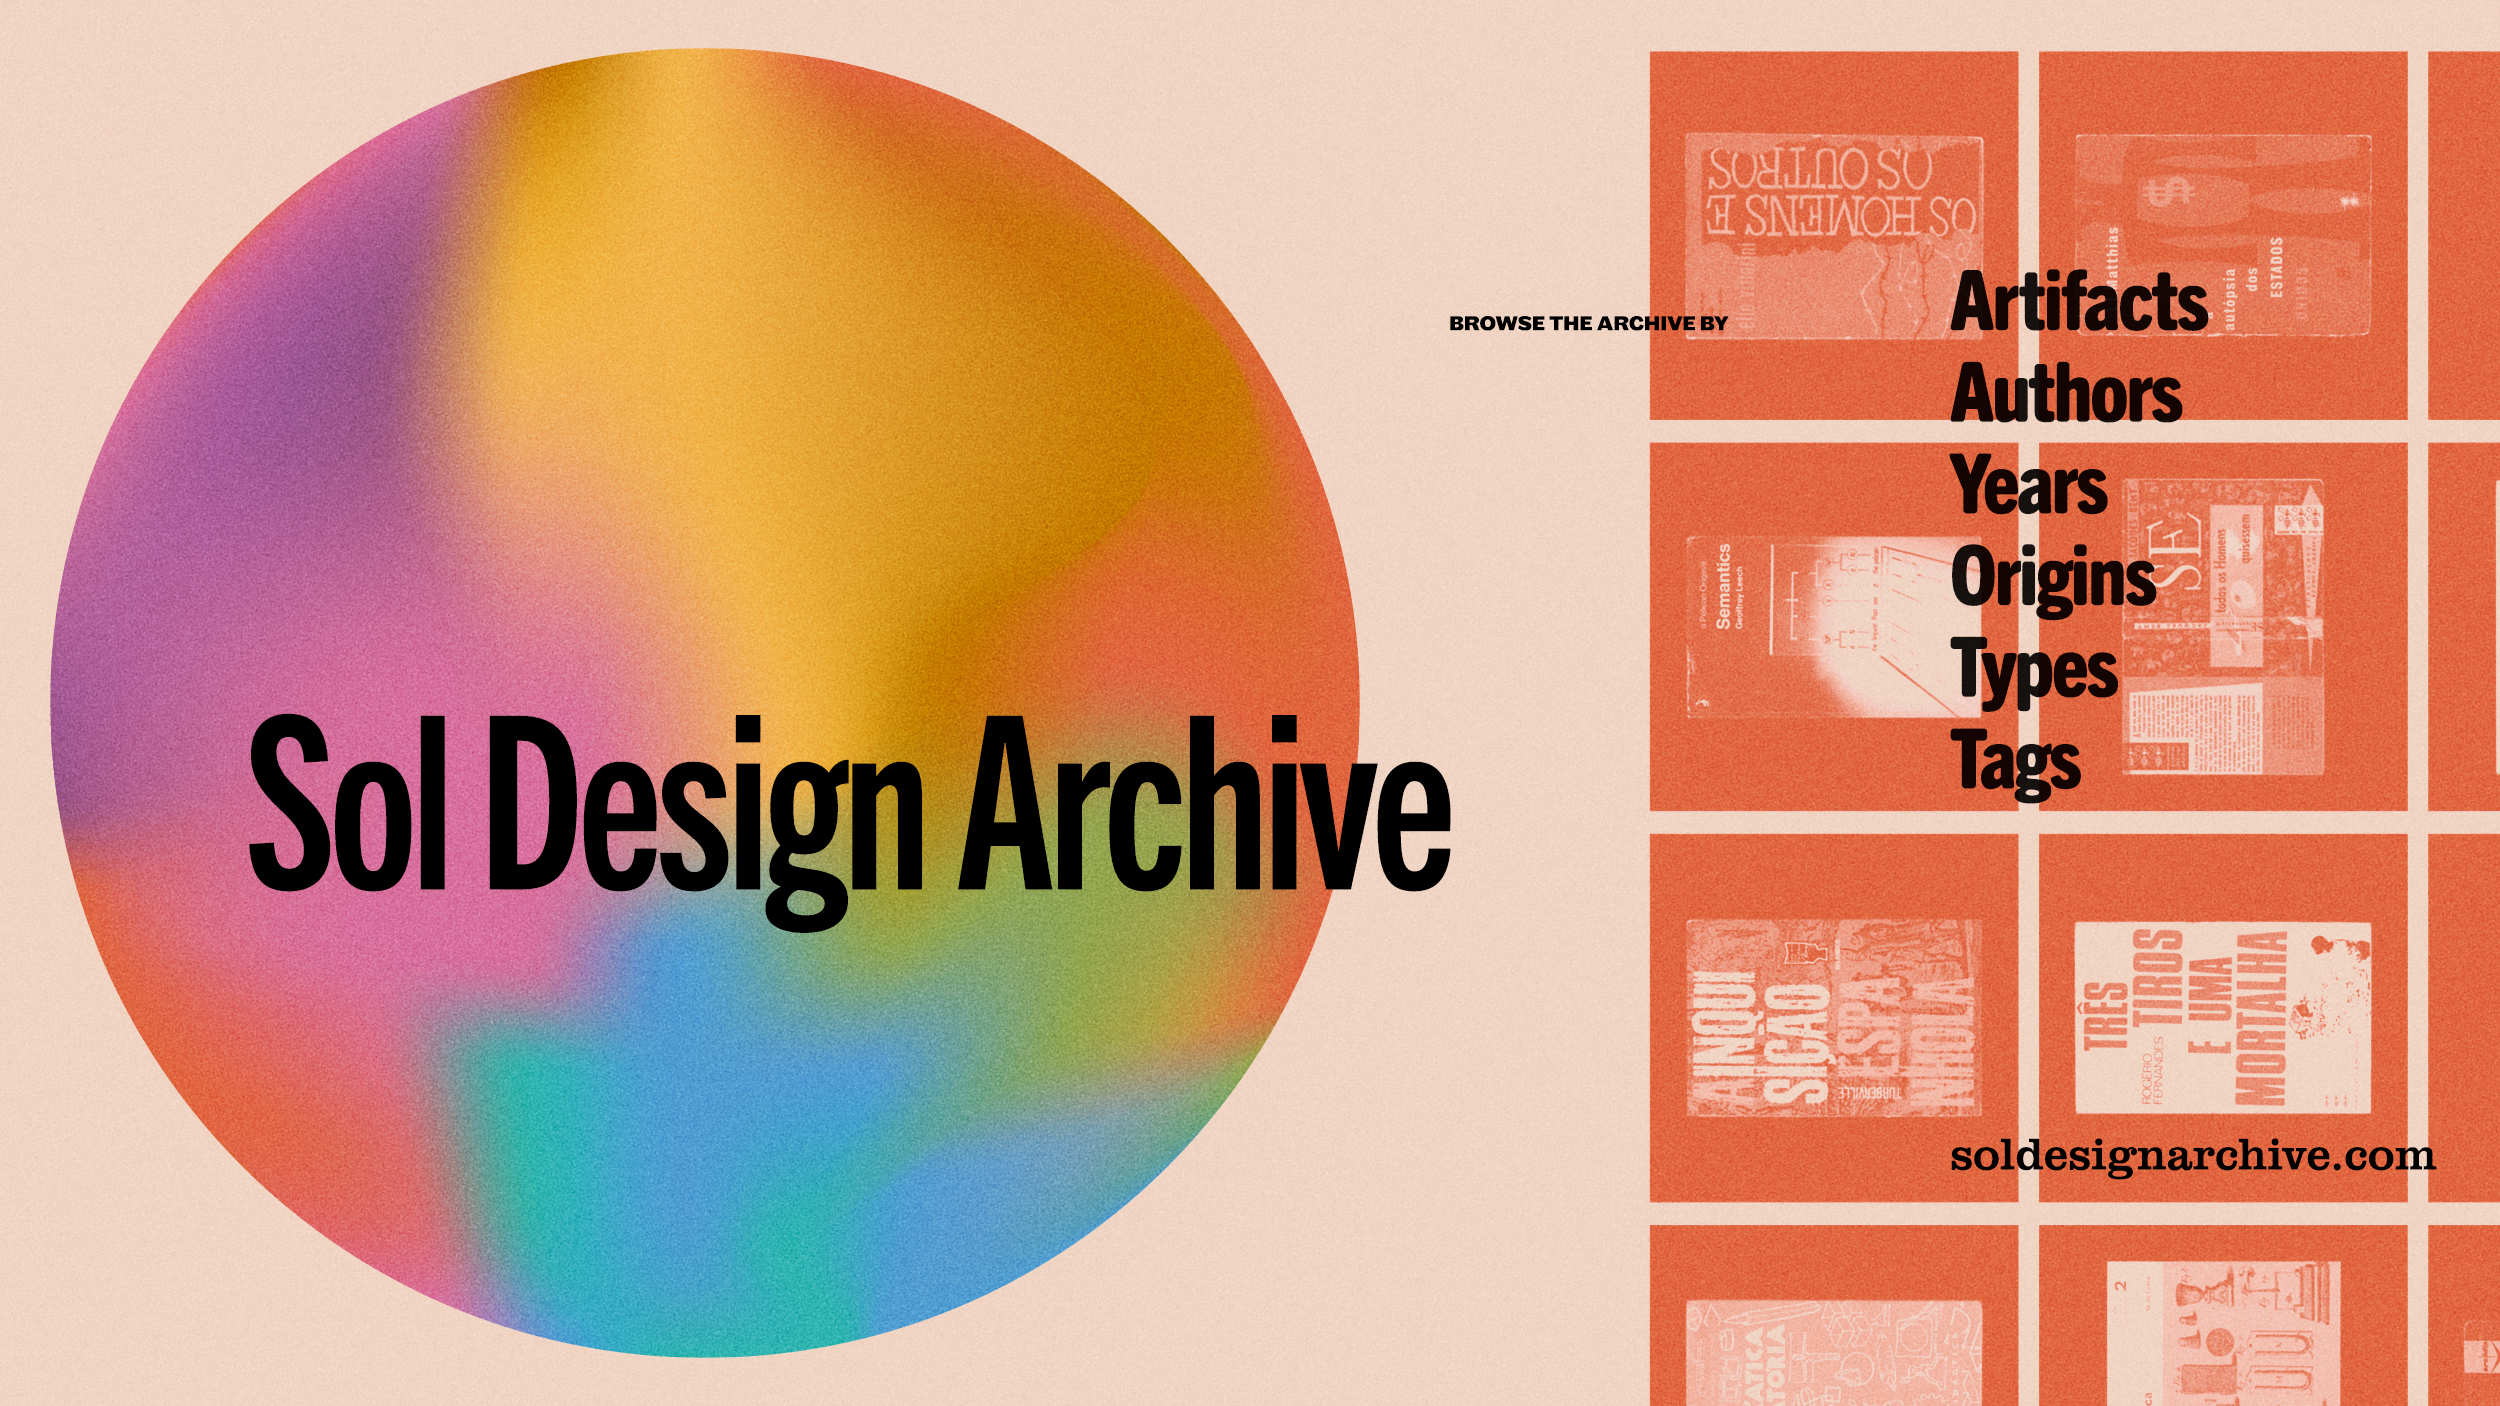 Introducing the Sol Design Archive